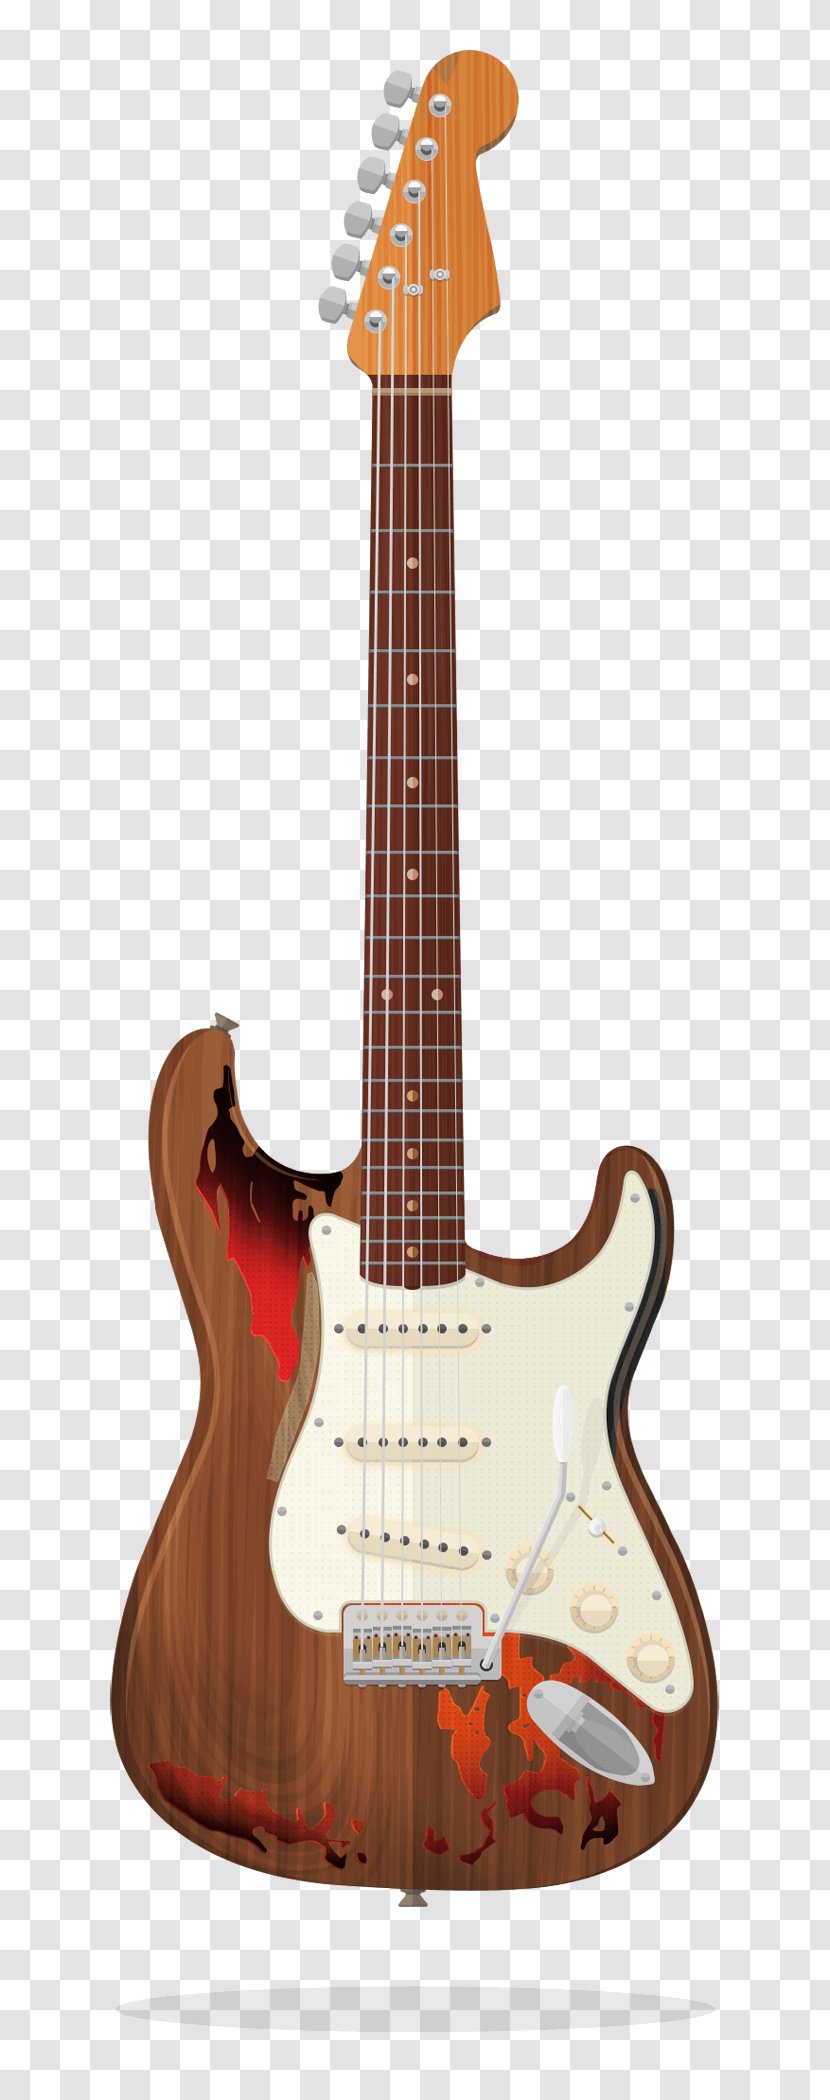 Electric Guitar Fender Stratocaster Bass Telecaster Eric Clapton - Silhouette Transparent PNG